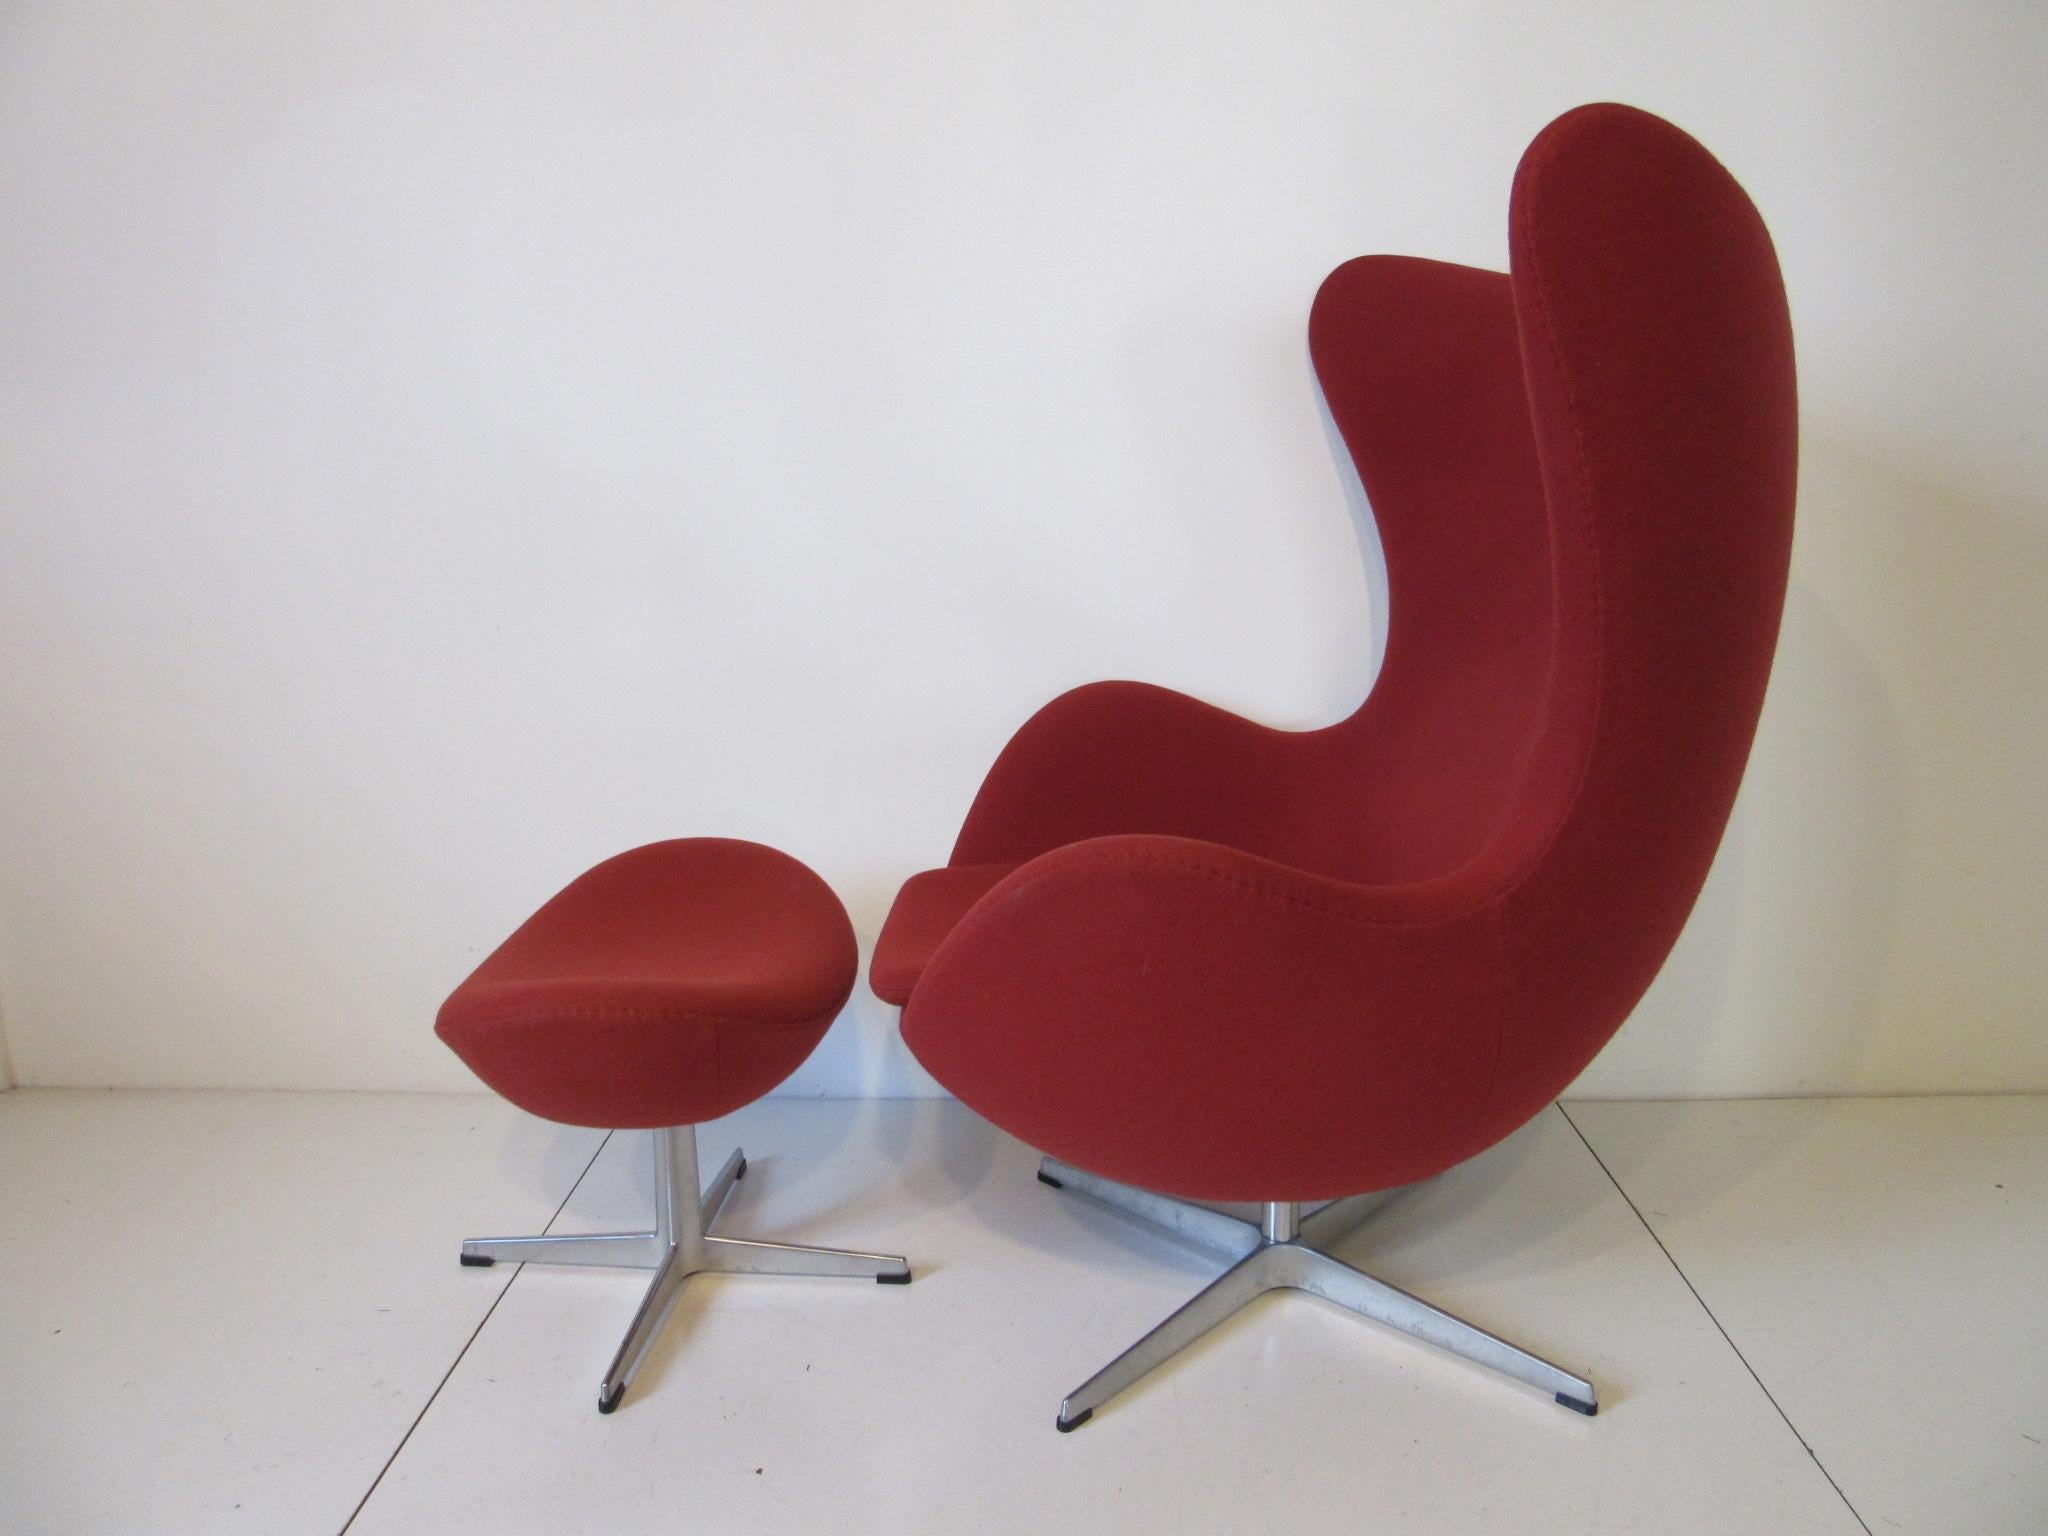 A swiveling and tilting Arne Jacobsen designed egg chair with matching ottoman in a darker red toned wool fabric, ordered with the optional adjustable tilting mechanism giving the chair added comfort. The ottoman size is 14.57